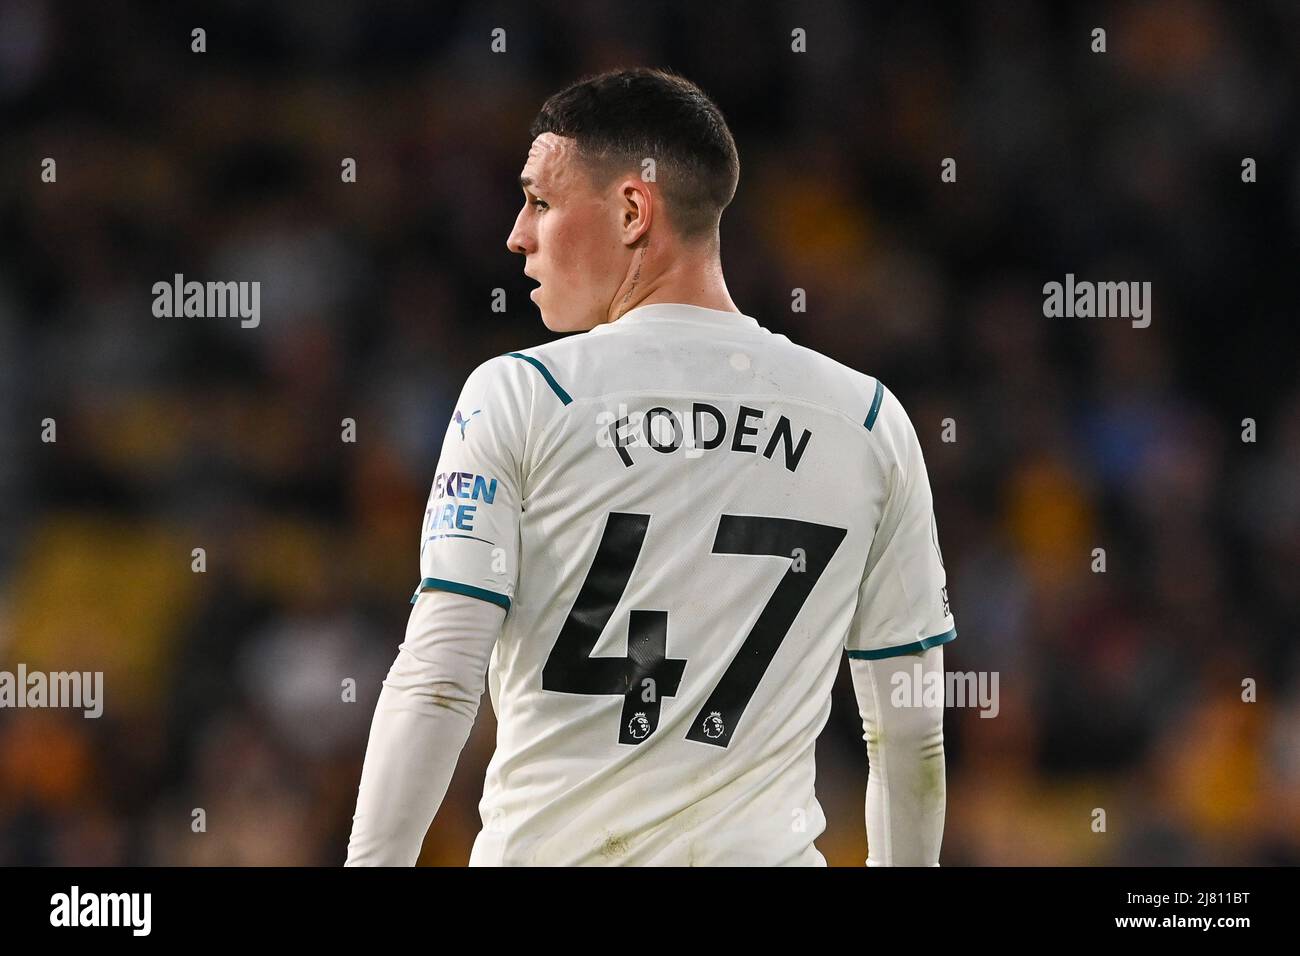 Phil Foden #47 of Manchester City during the game Stock Photo